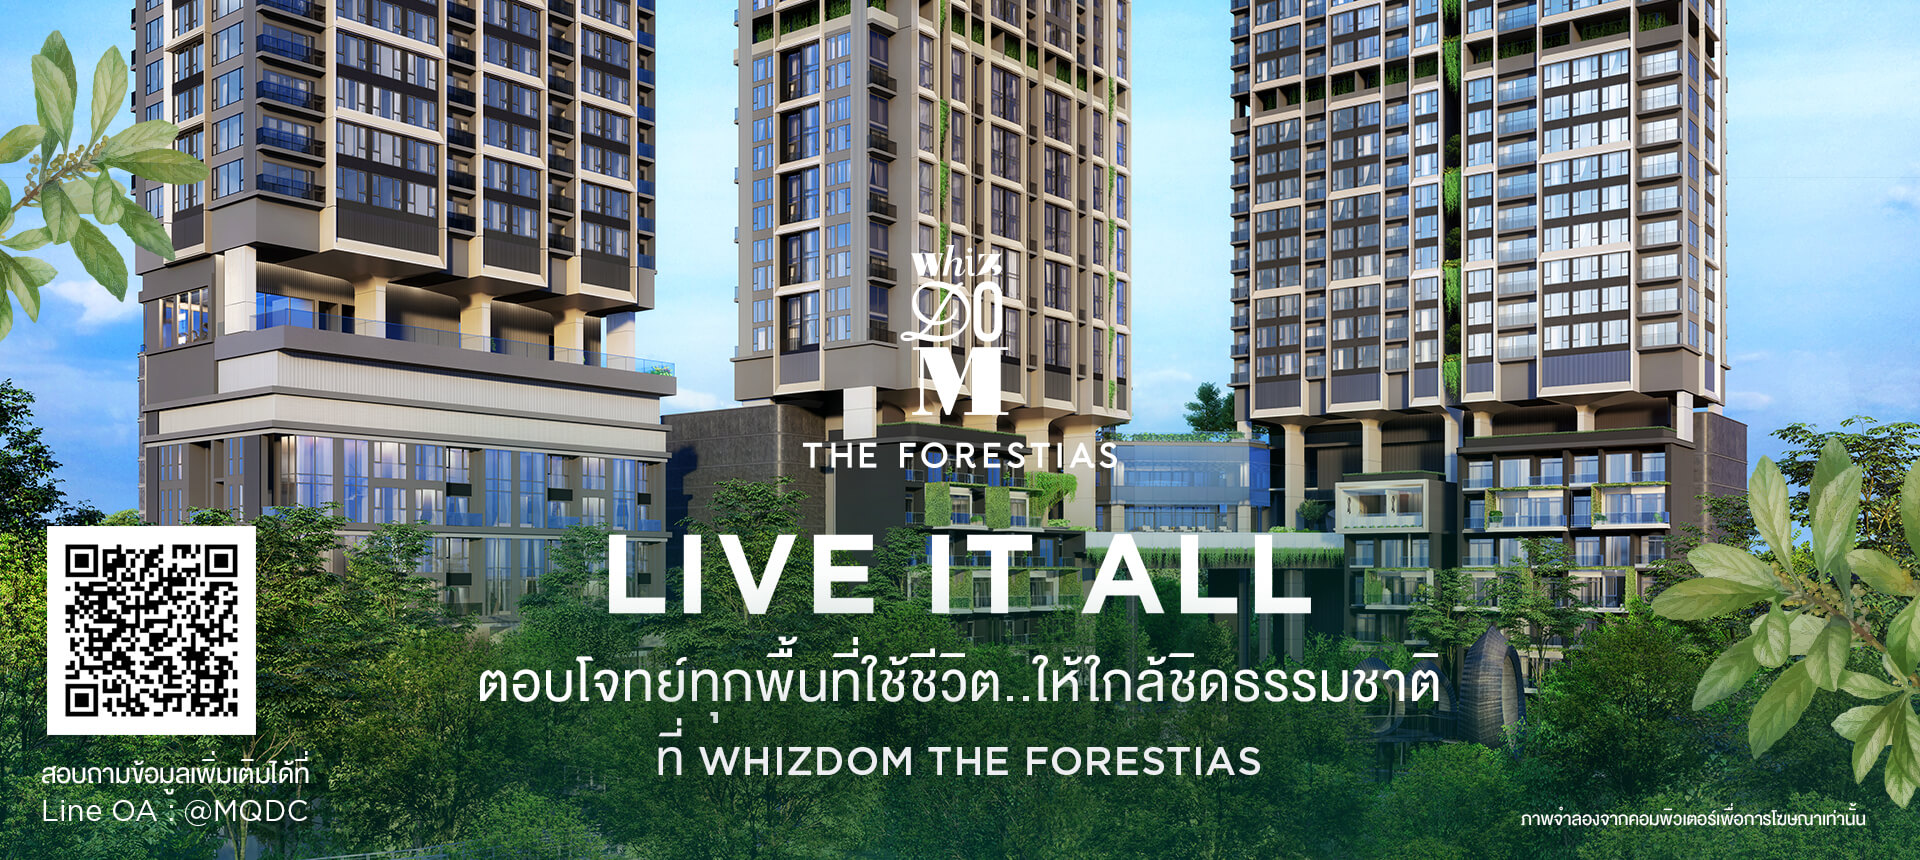 Whizdom The Forestias project desktop